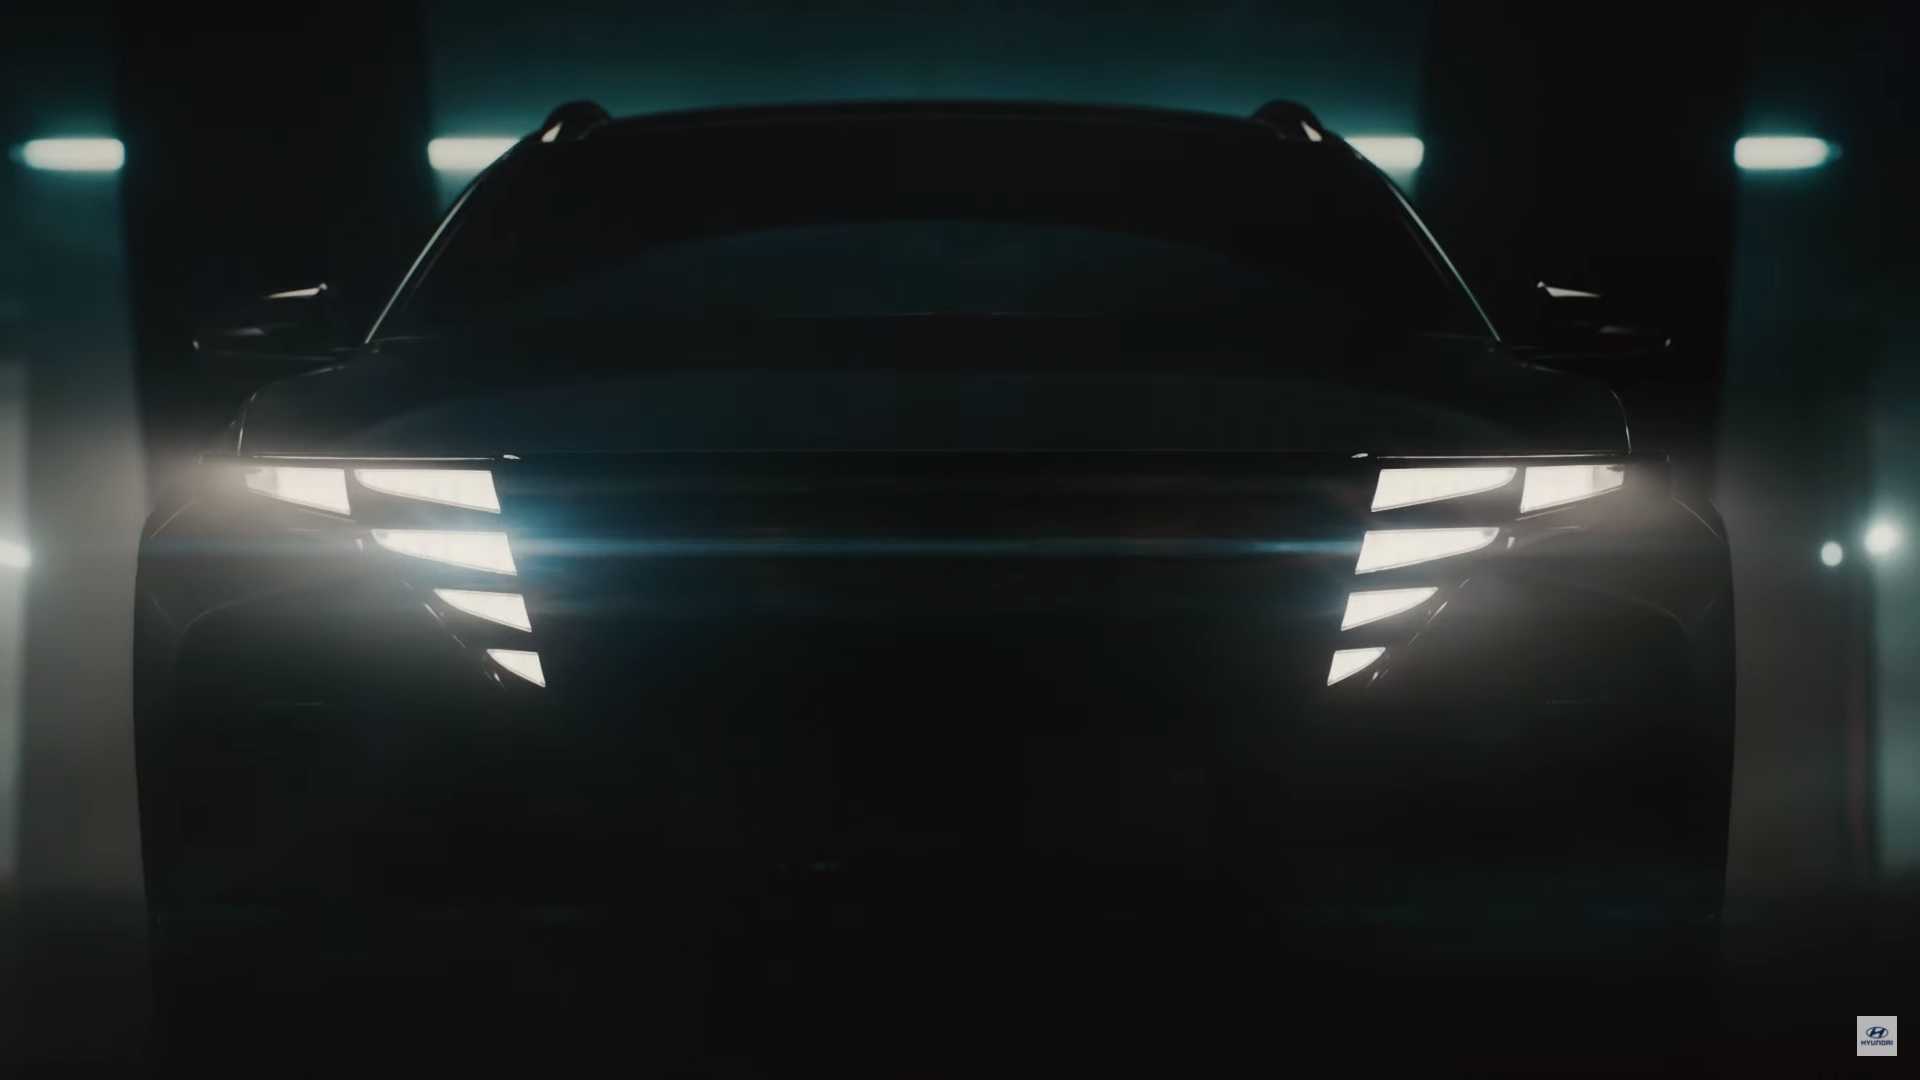 2022 hyundai santa fe interior features · cargo volume of 72.1 cubic feet with seat area; 2021 Hyundai Tucson Lights Up Its Grille In Two New Teaser